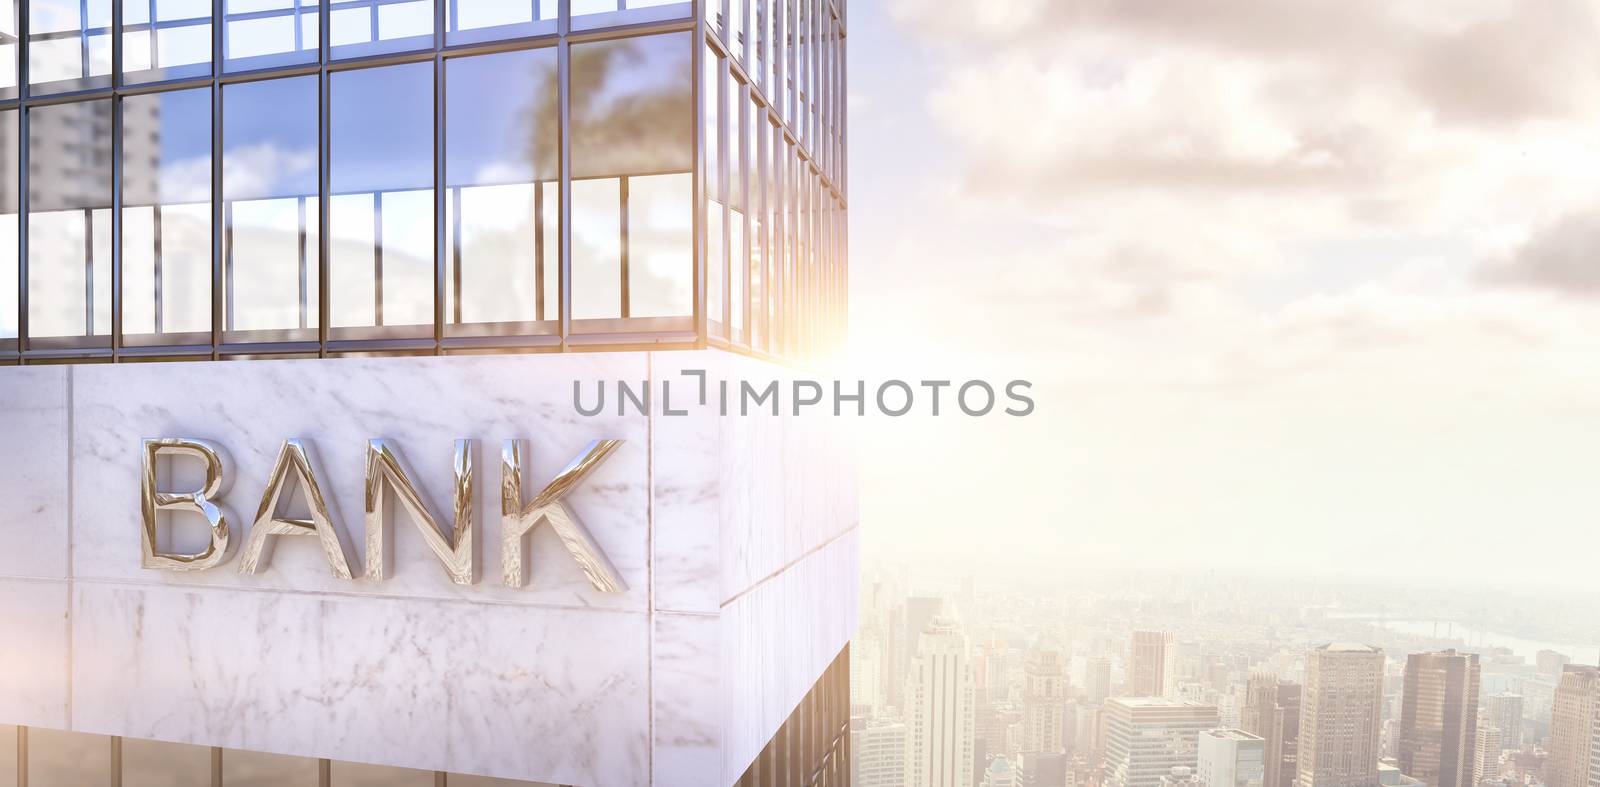 Graphic image of bank building against image of a city landscape on a sunny day 